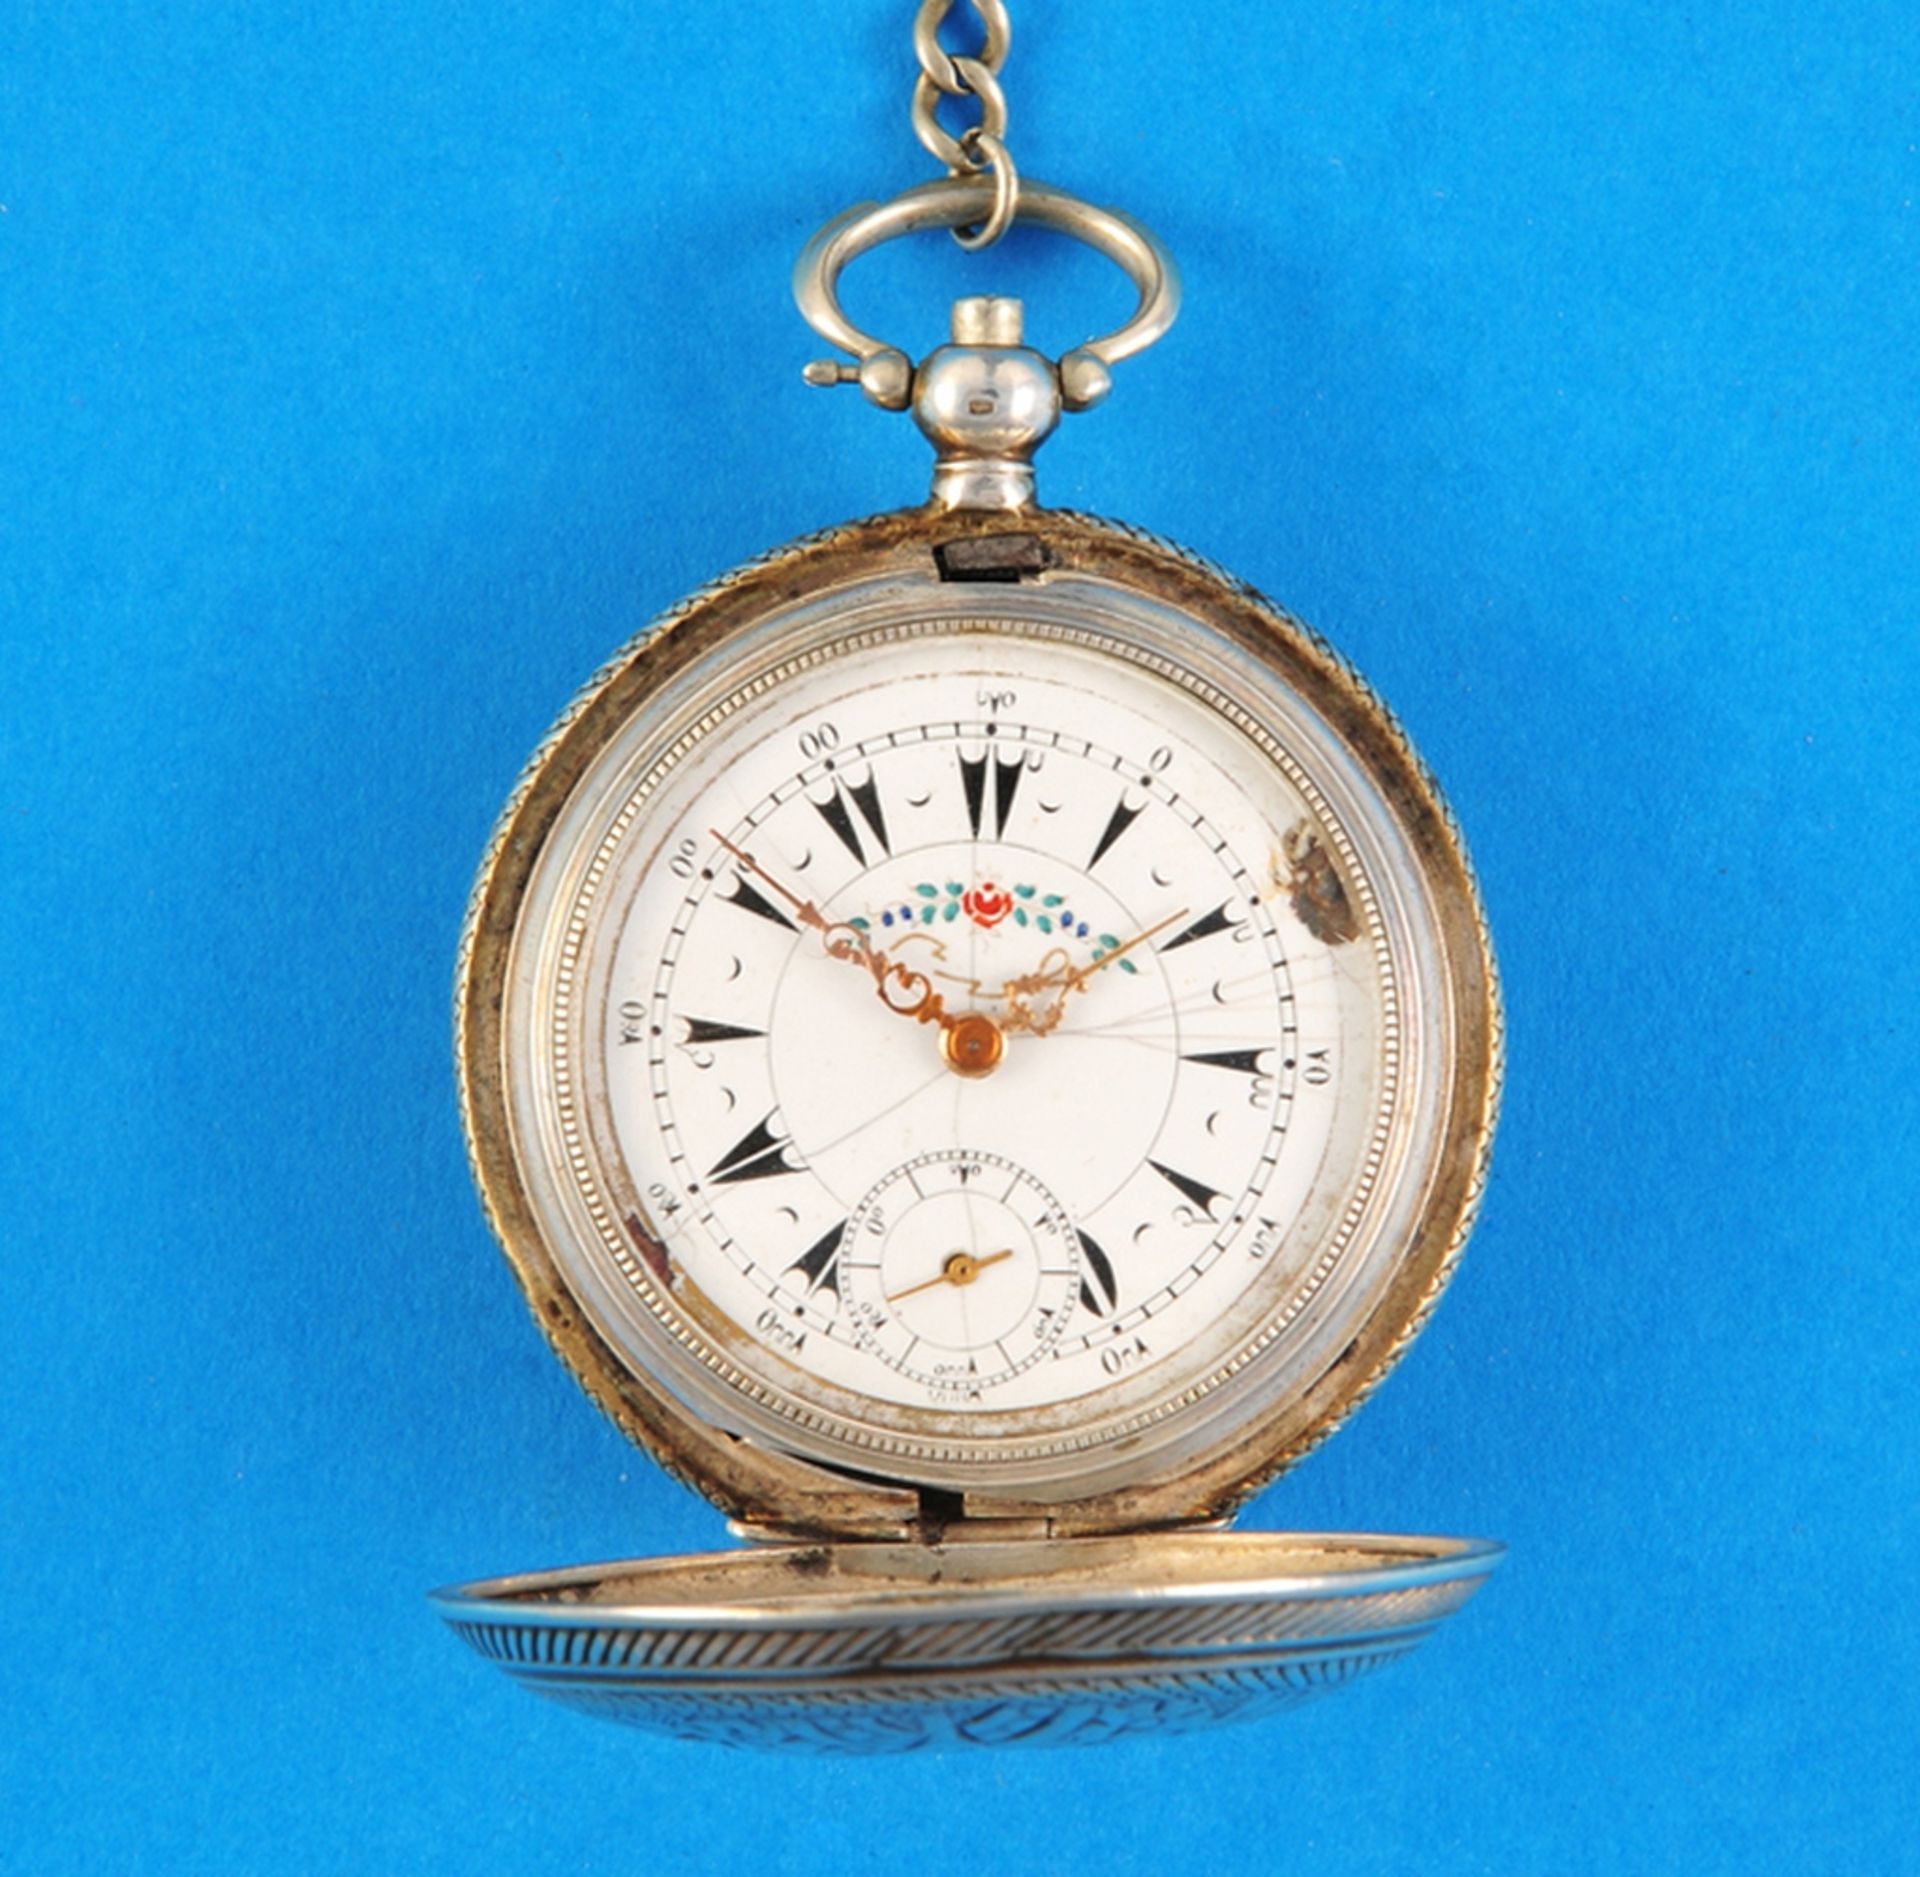 Engraved english silver pocket watch with spring cover for the ottoman market